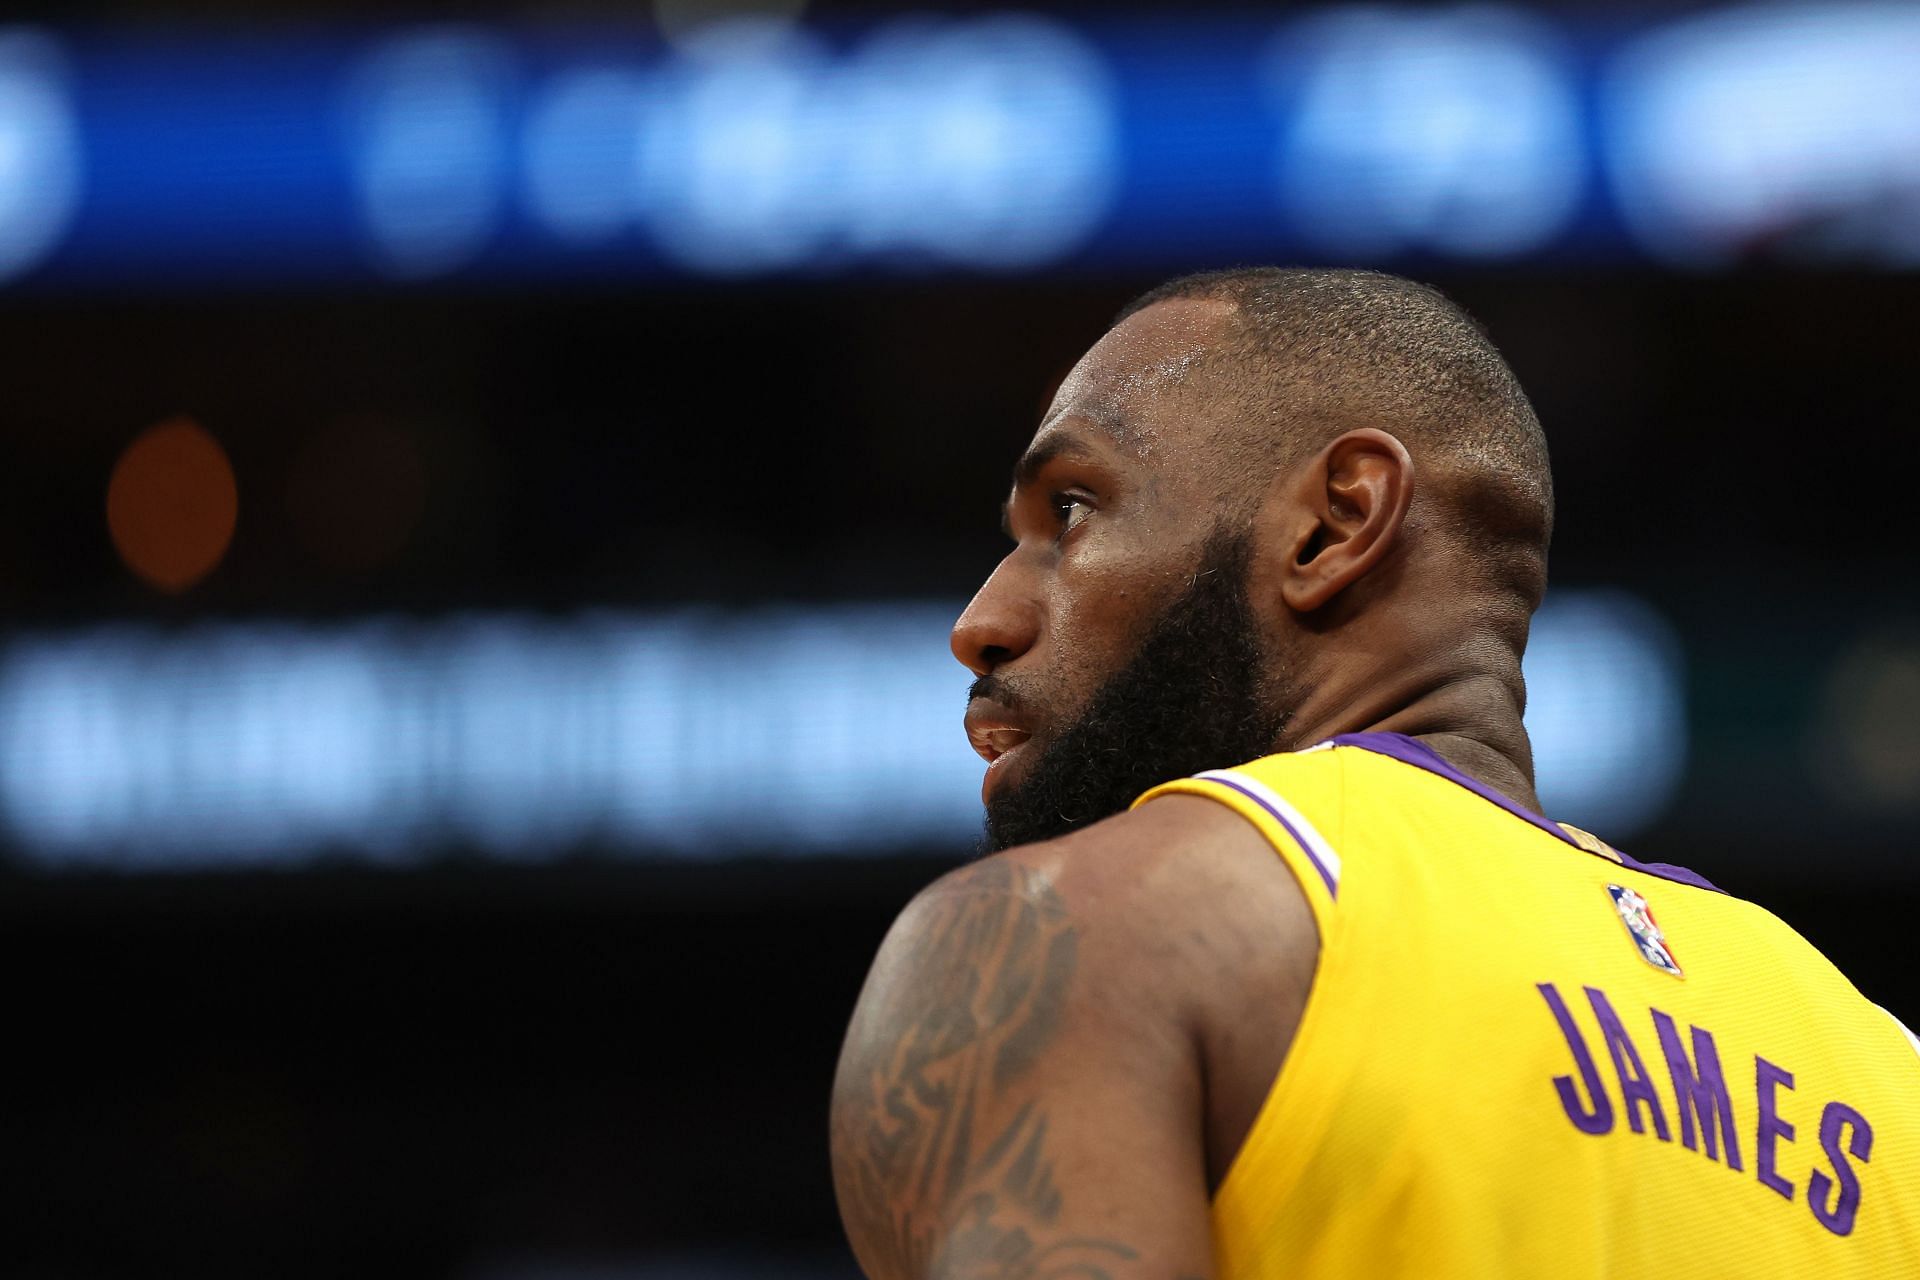 LeBron James in action during the Los Angeles Lakers vs Washington Wizards game